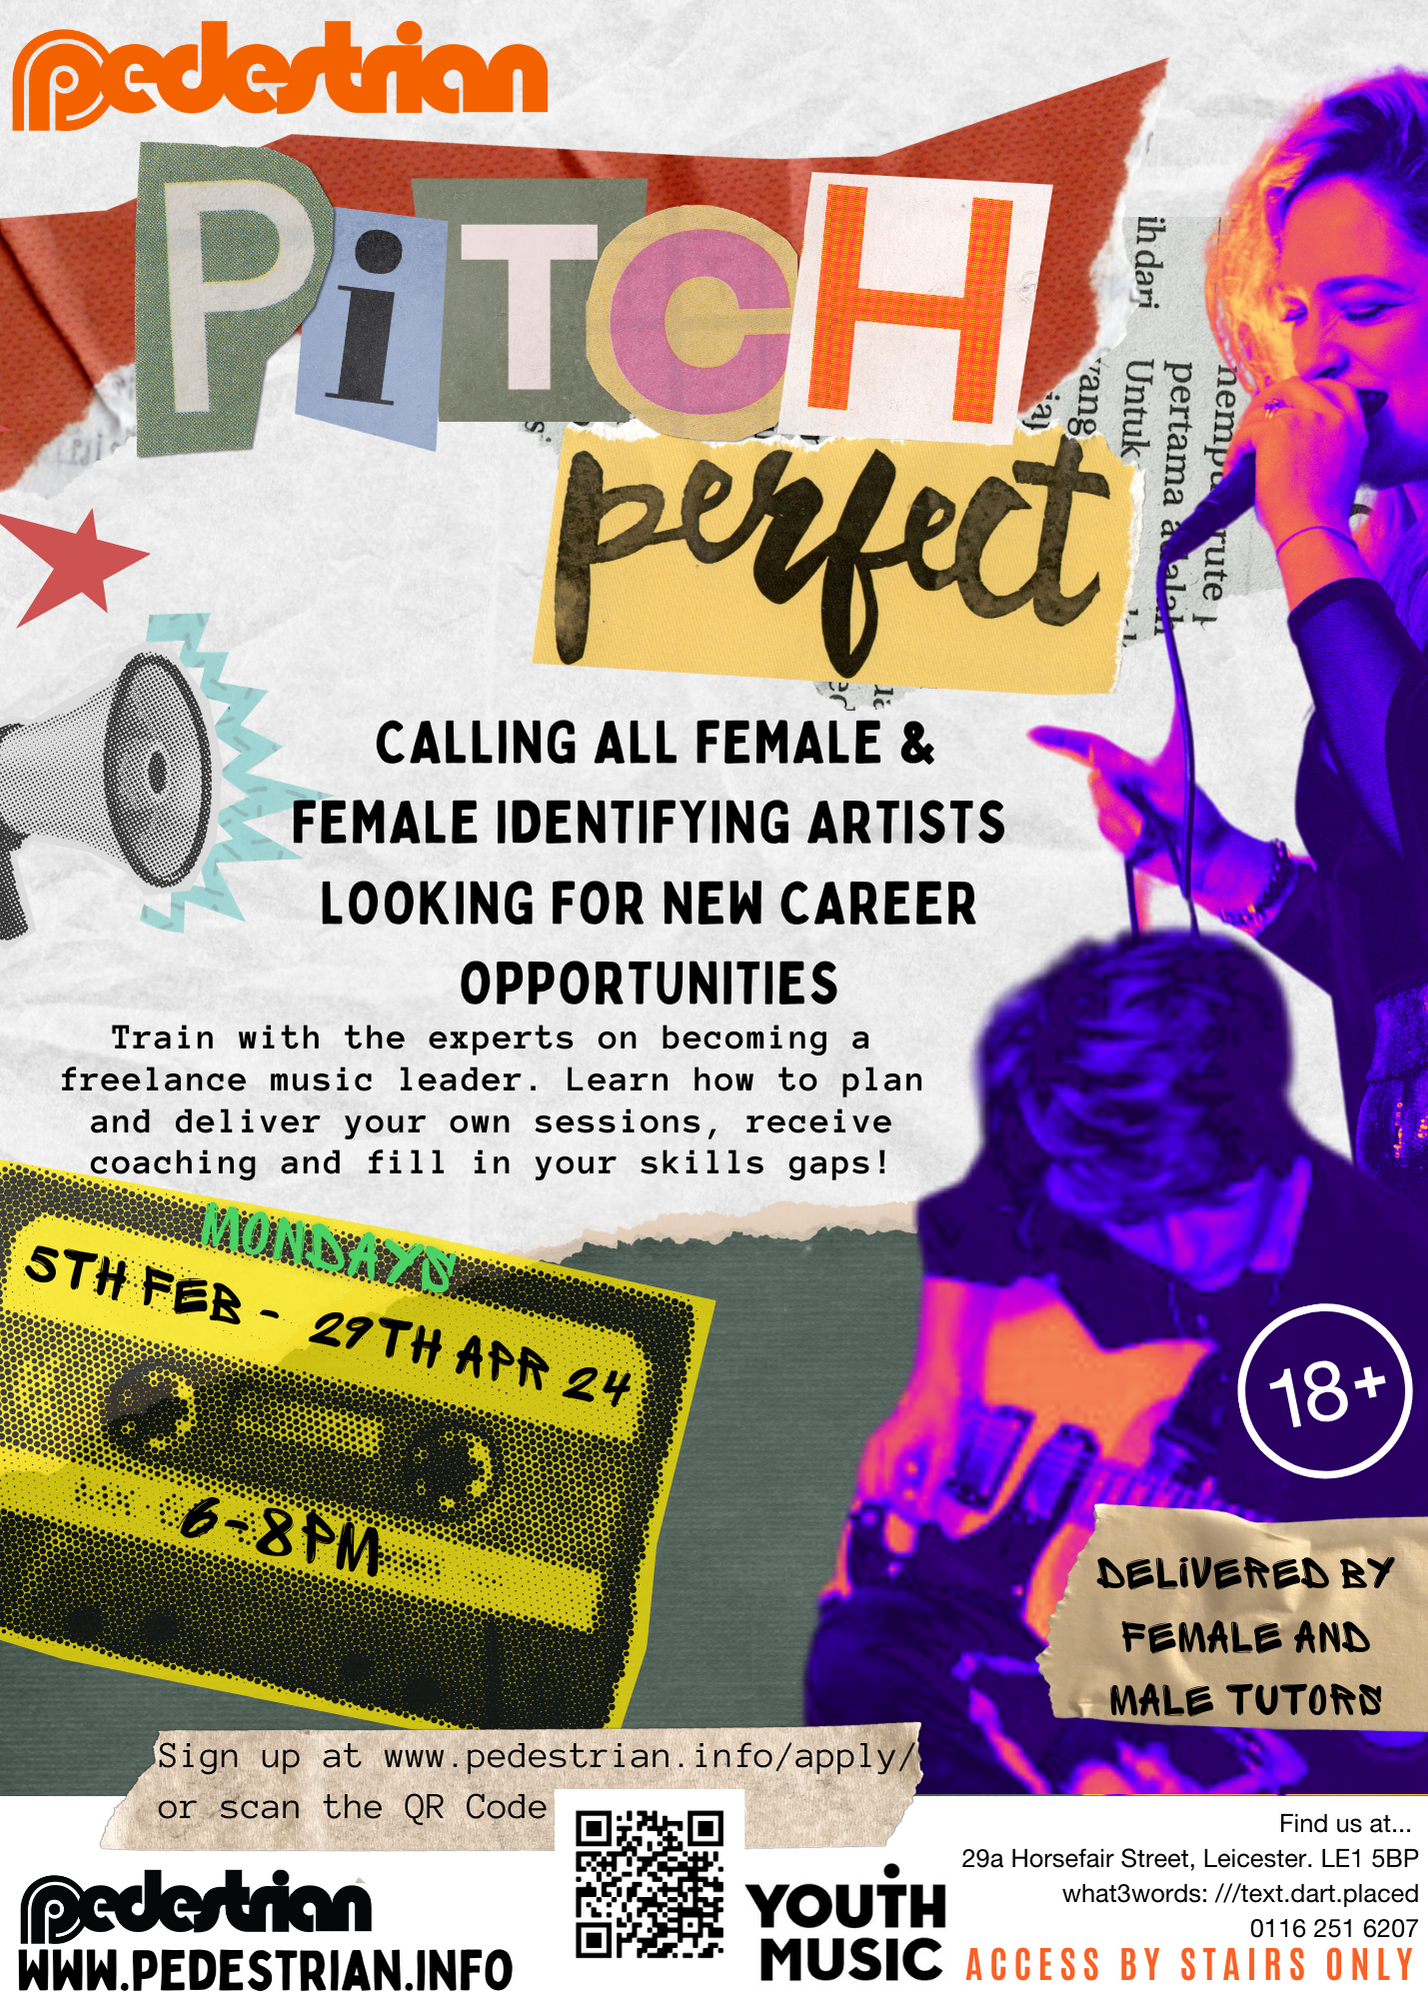 Pedestrian Pitch Perfect Flyer -  Calling all female &<br />
female identifying artists looking for new career opportunities. Train with the experts on becoming a freelance music leader. Learn how to plan and deliver your own sessions, receive coaching and fill in your skills gaps!  5th Feb -  29th Apr 24. 6-8pm. Sign up at www.pedestrian.info/apply/<br />
or scan the QR Code